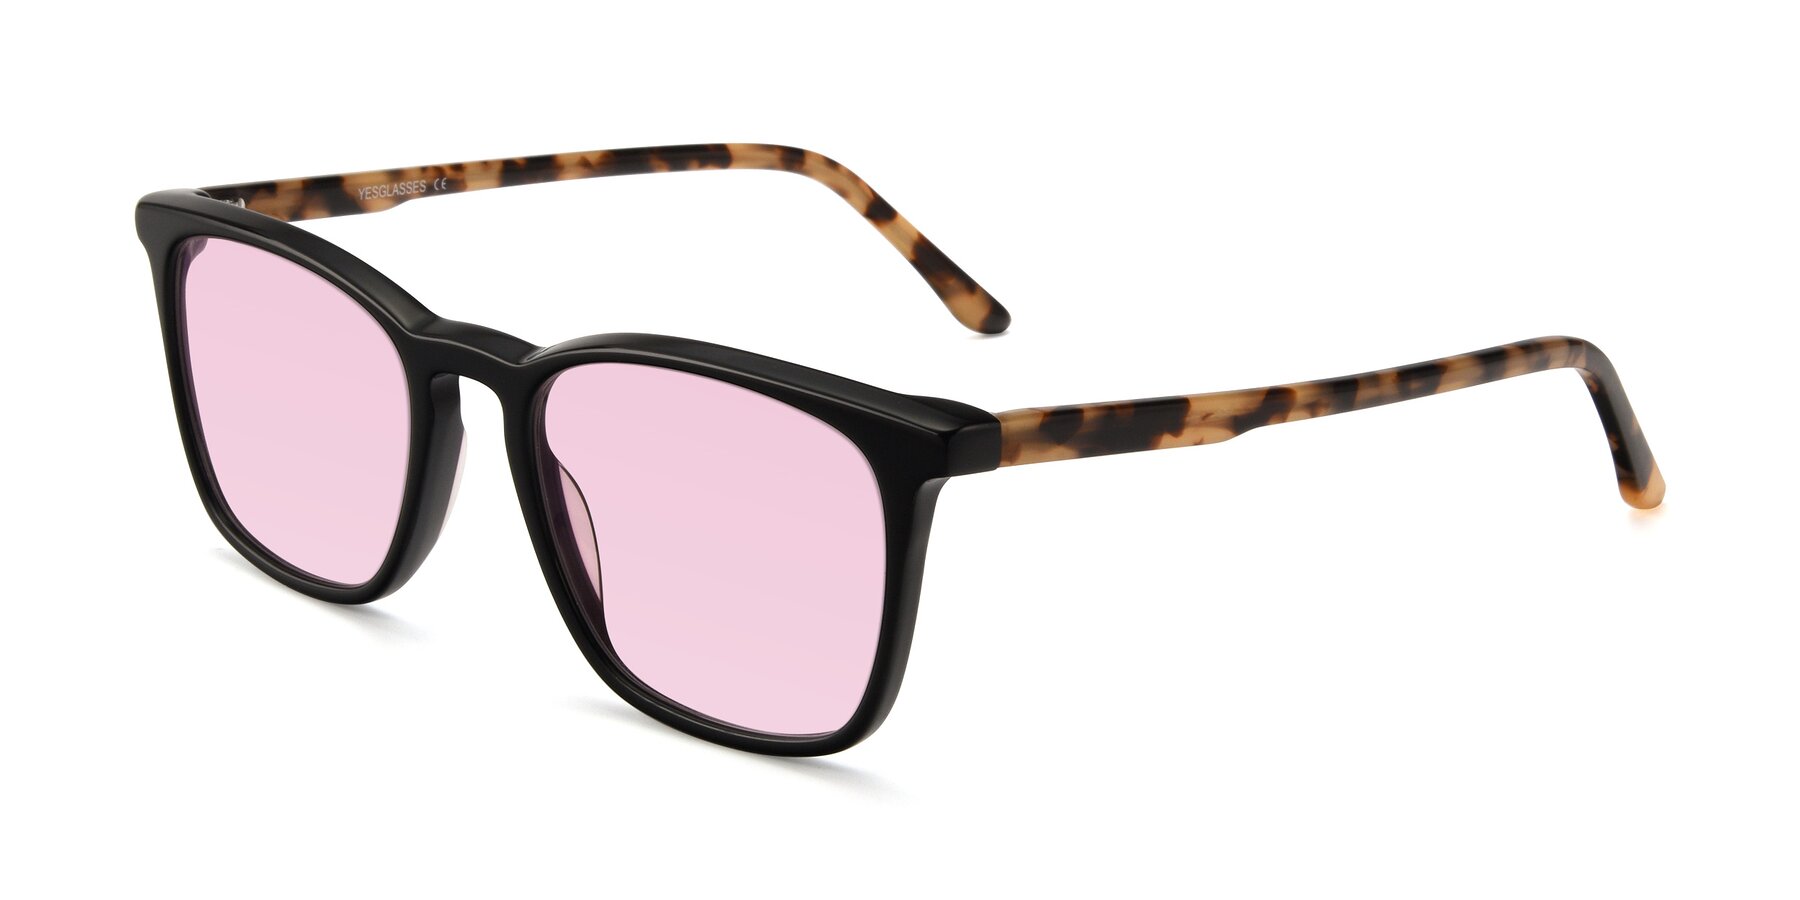 Angle of Vigor in Black-Tortoise with Light Pink Tinted Lenses